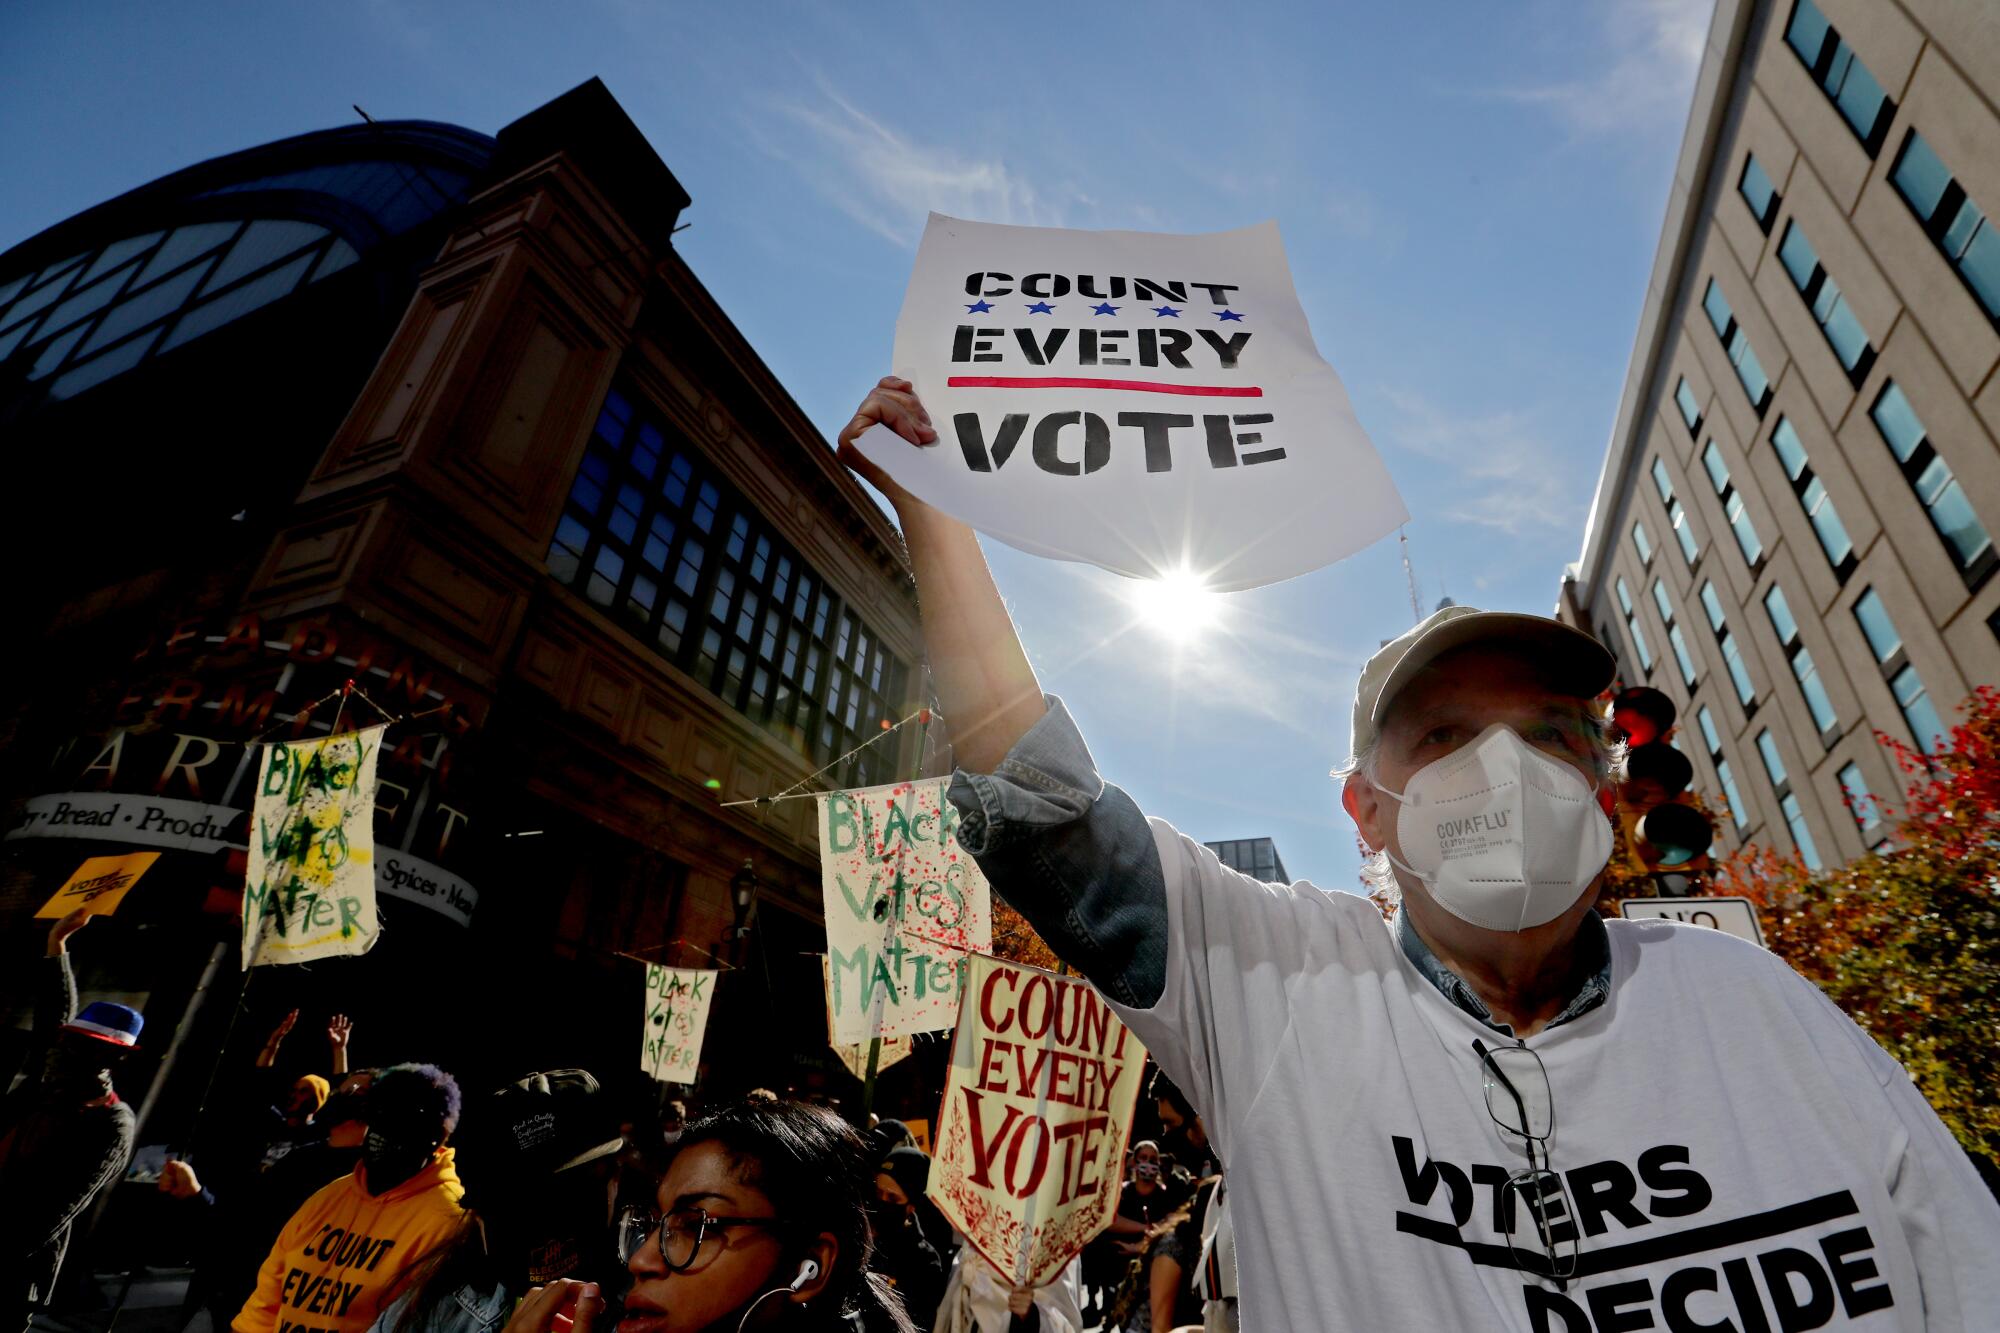 People hold signs reading "Count every vote" and "Black votes matter."